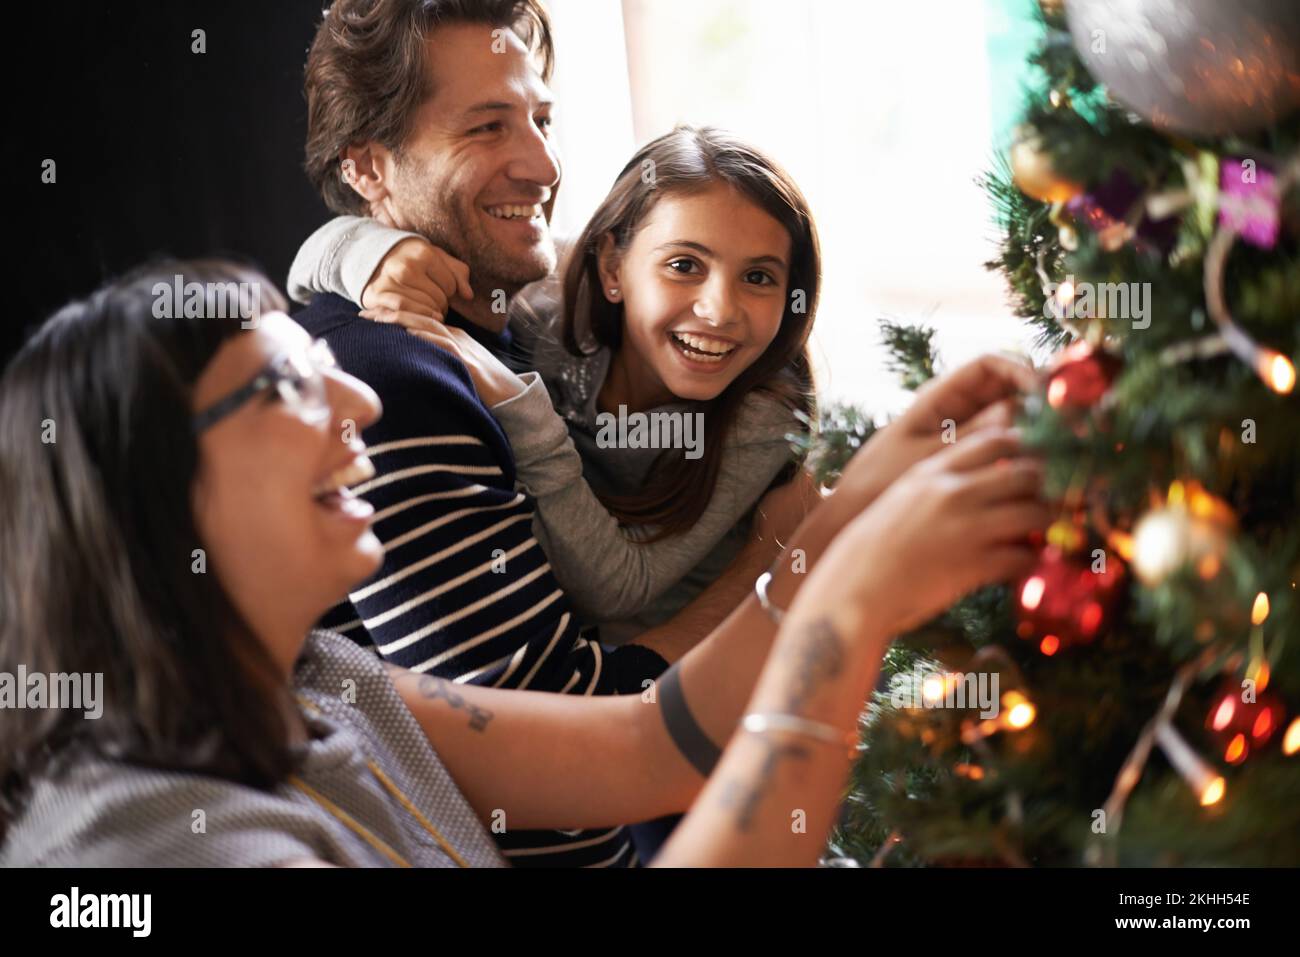 Oh mom youre no good at this. family laughing at their poor decorating skills. Stock Photo